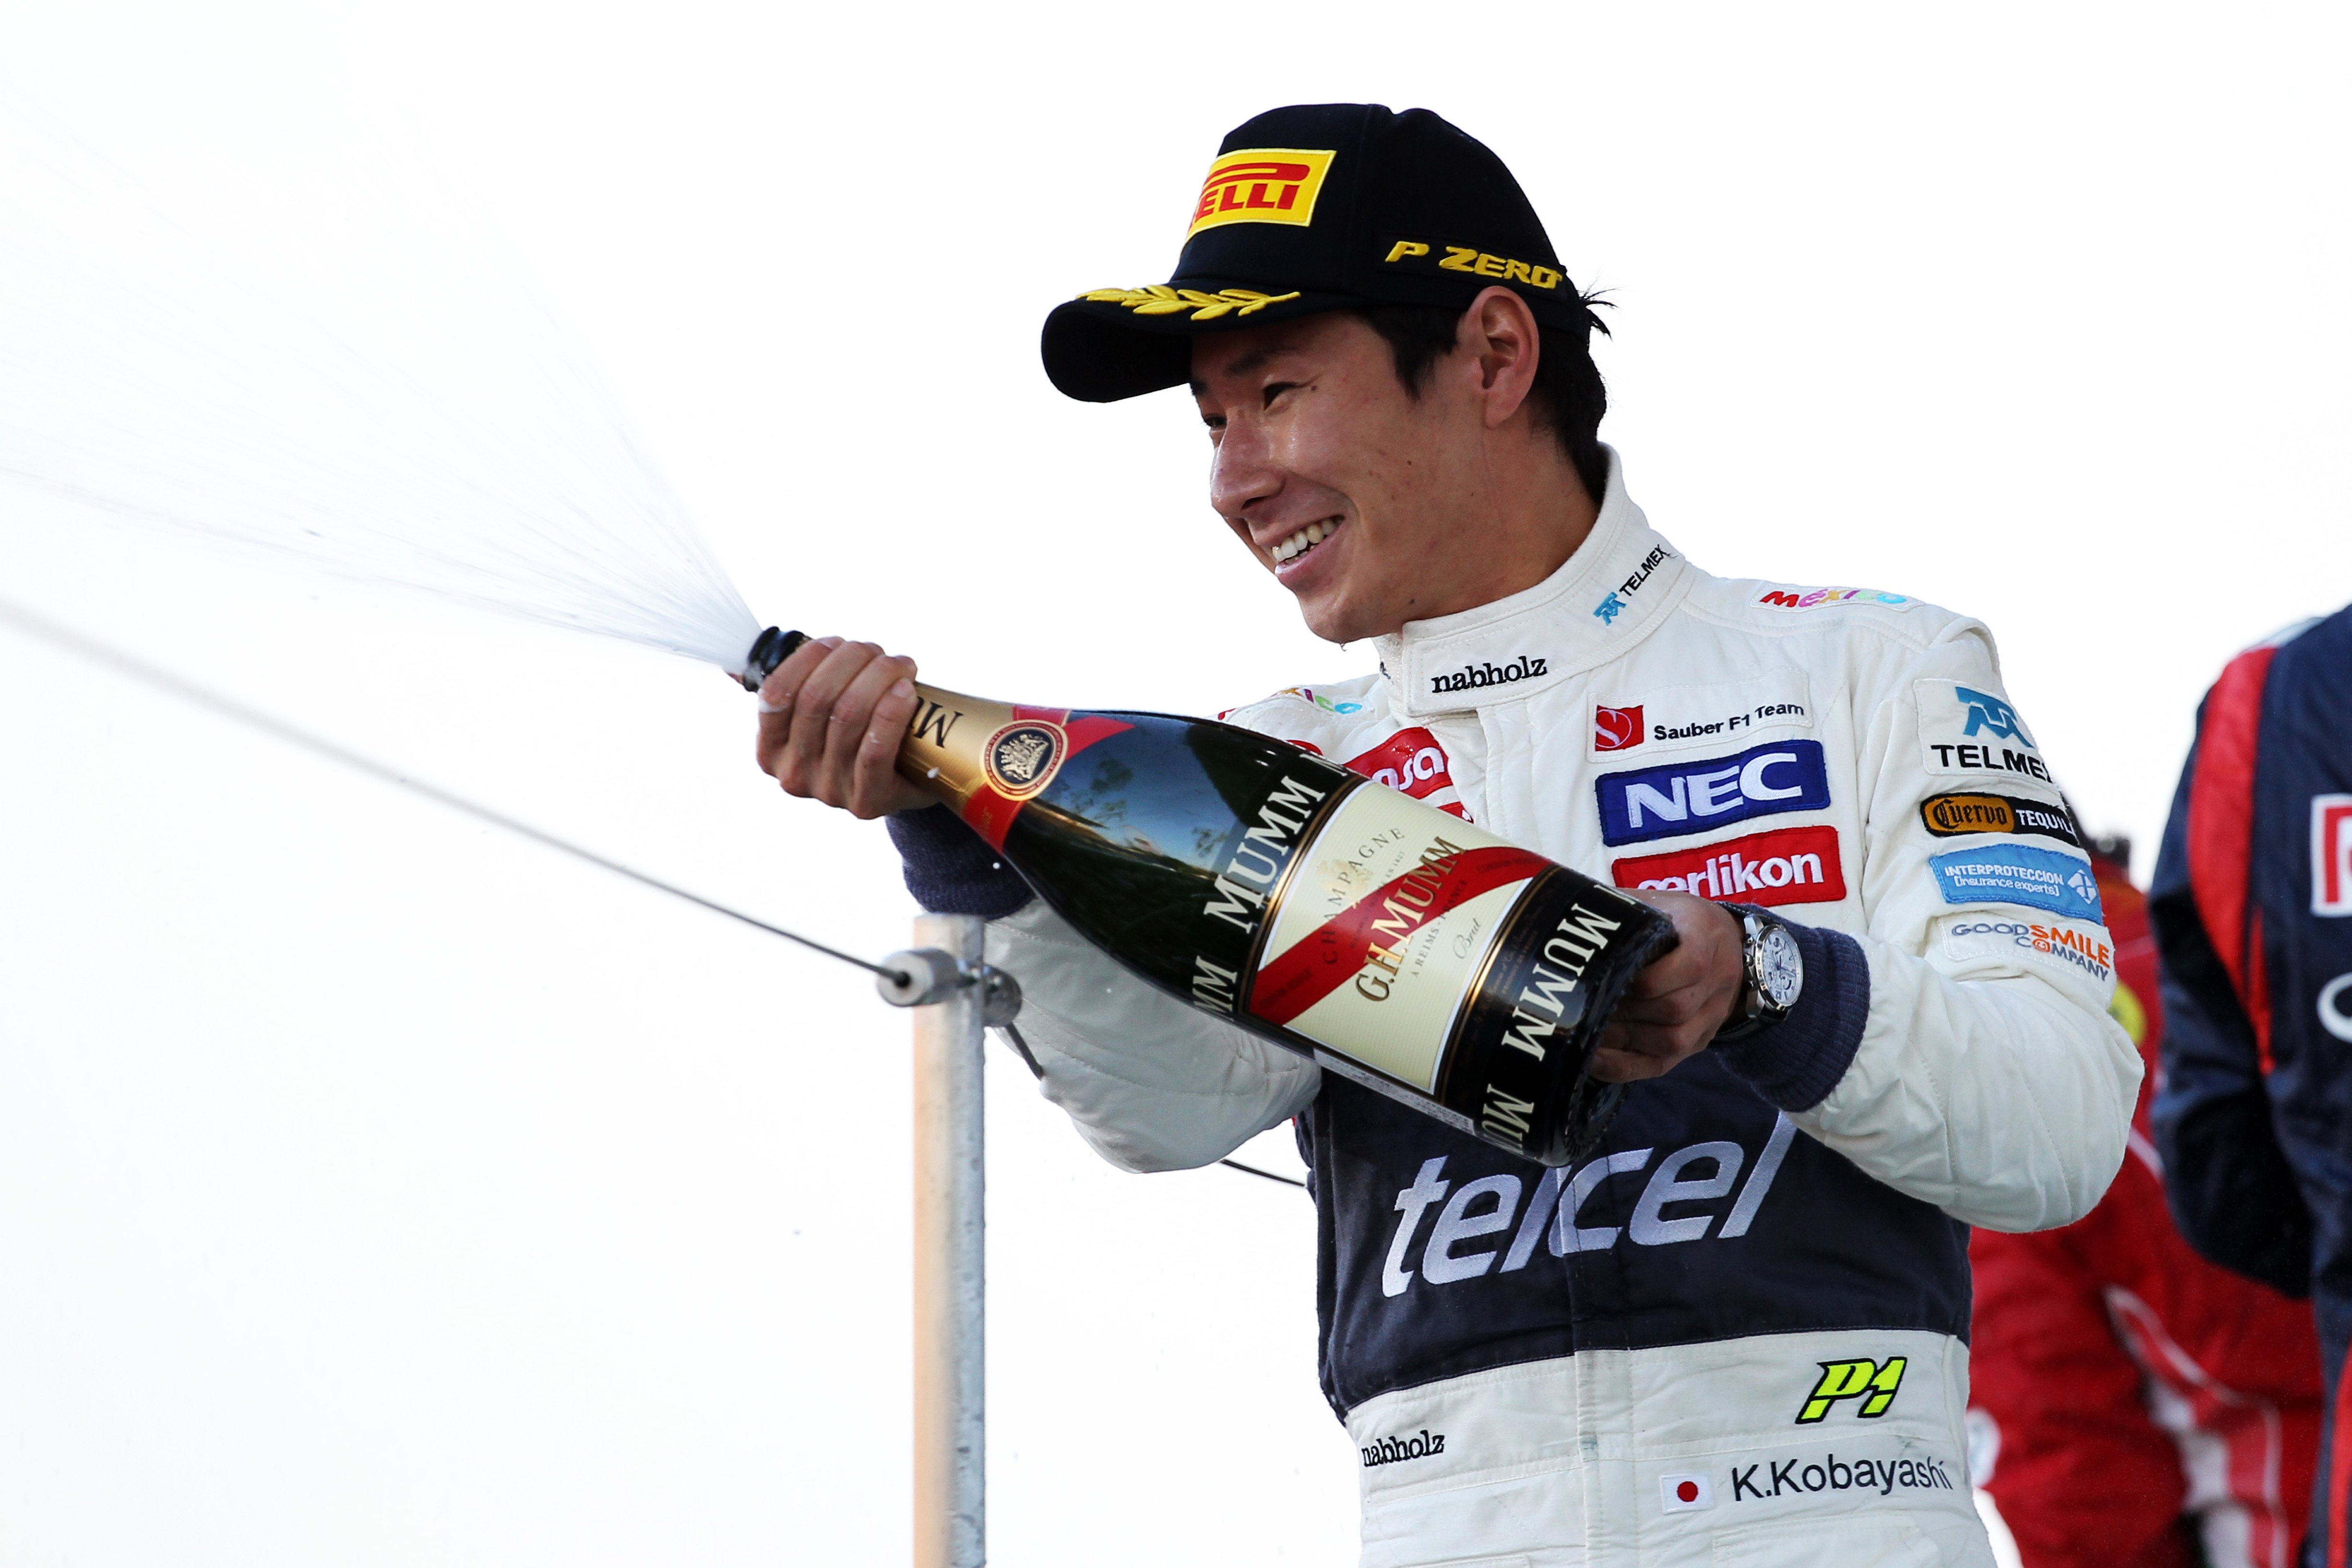 Kamui Kobayashi was the last Japanese driver to race in F1 and stand on the podium. 